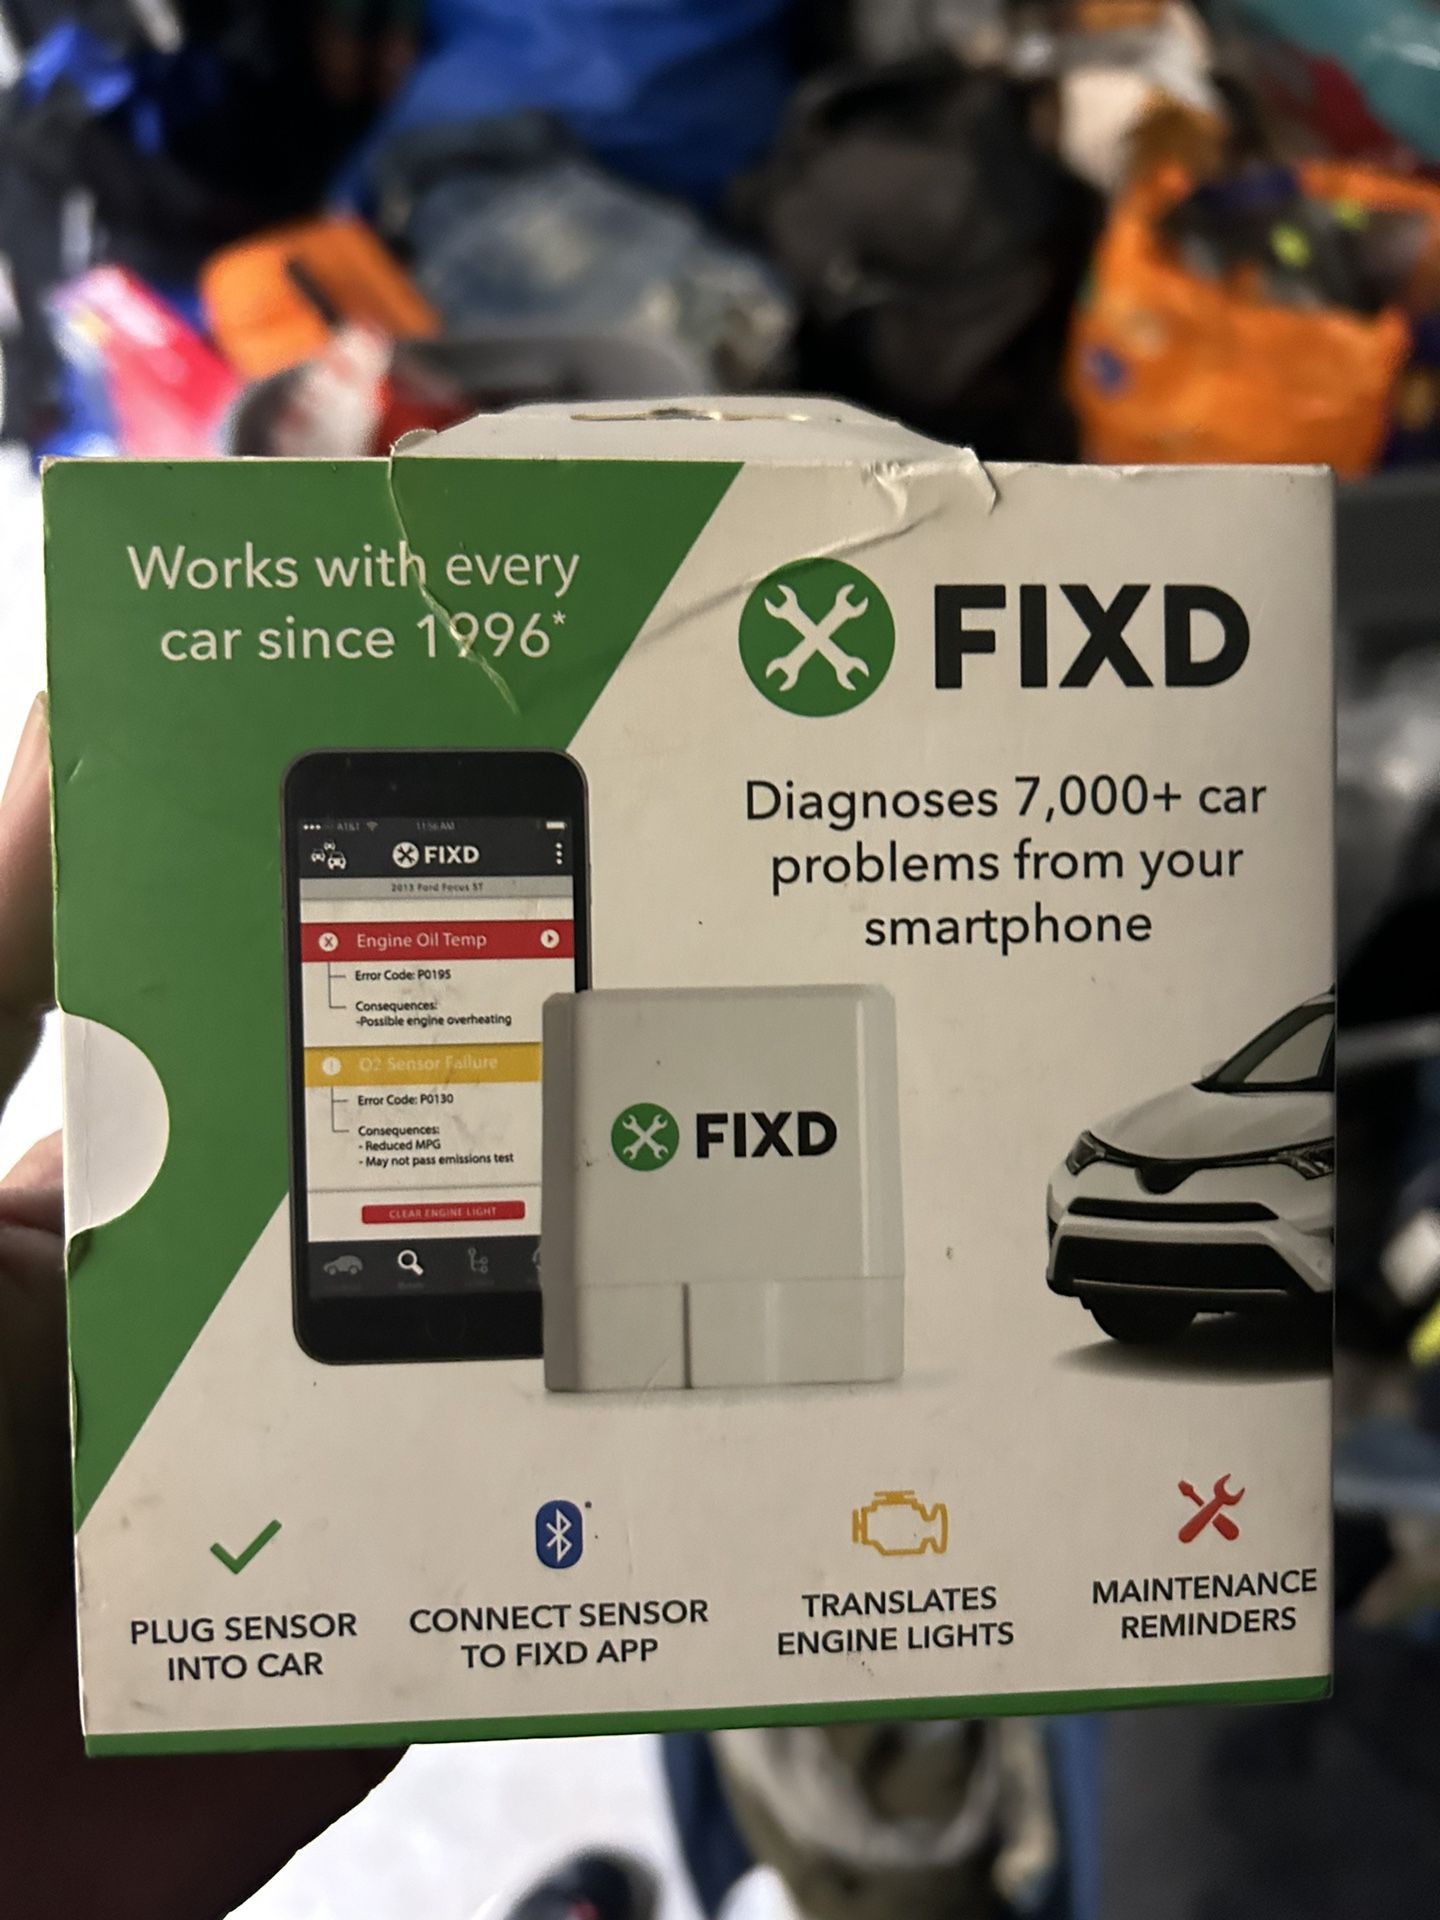 FIXD” ODB SCANNER FOR ALL CARS”